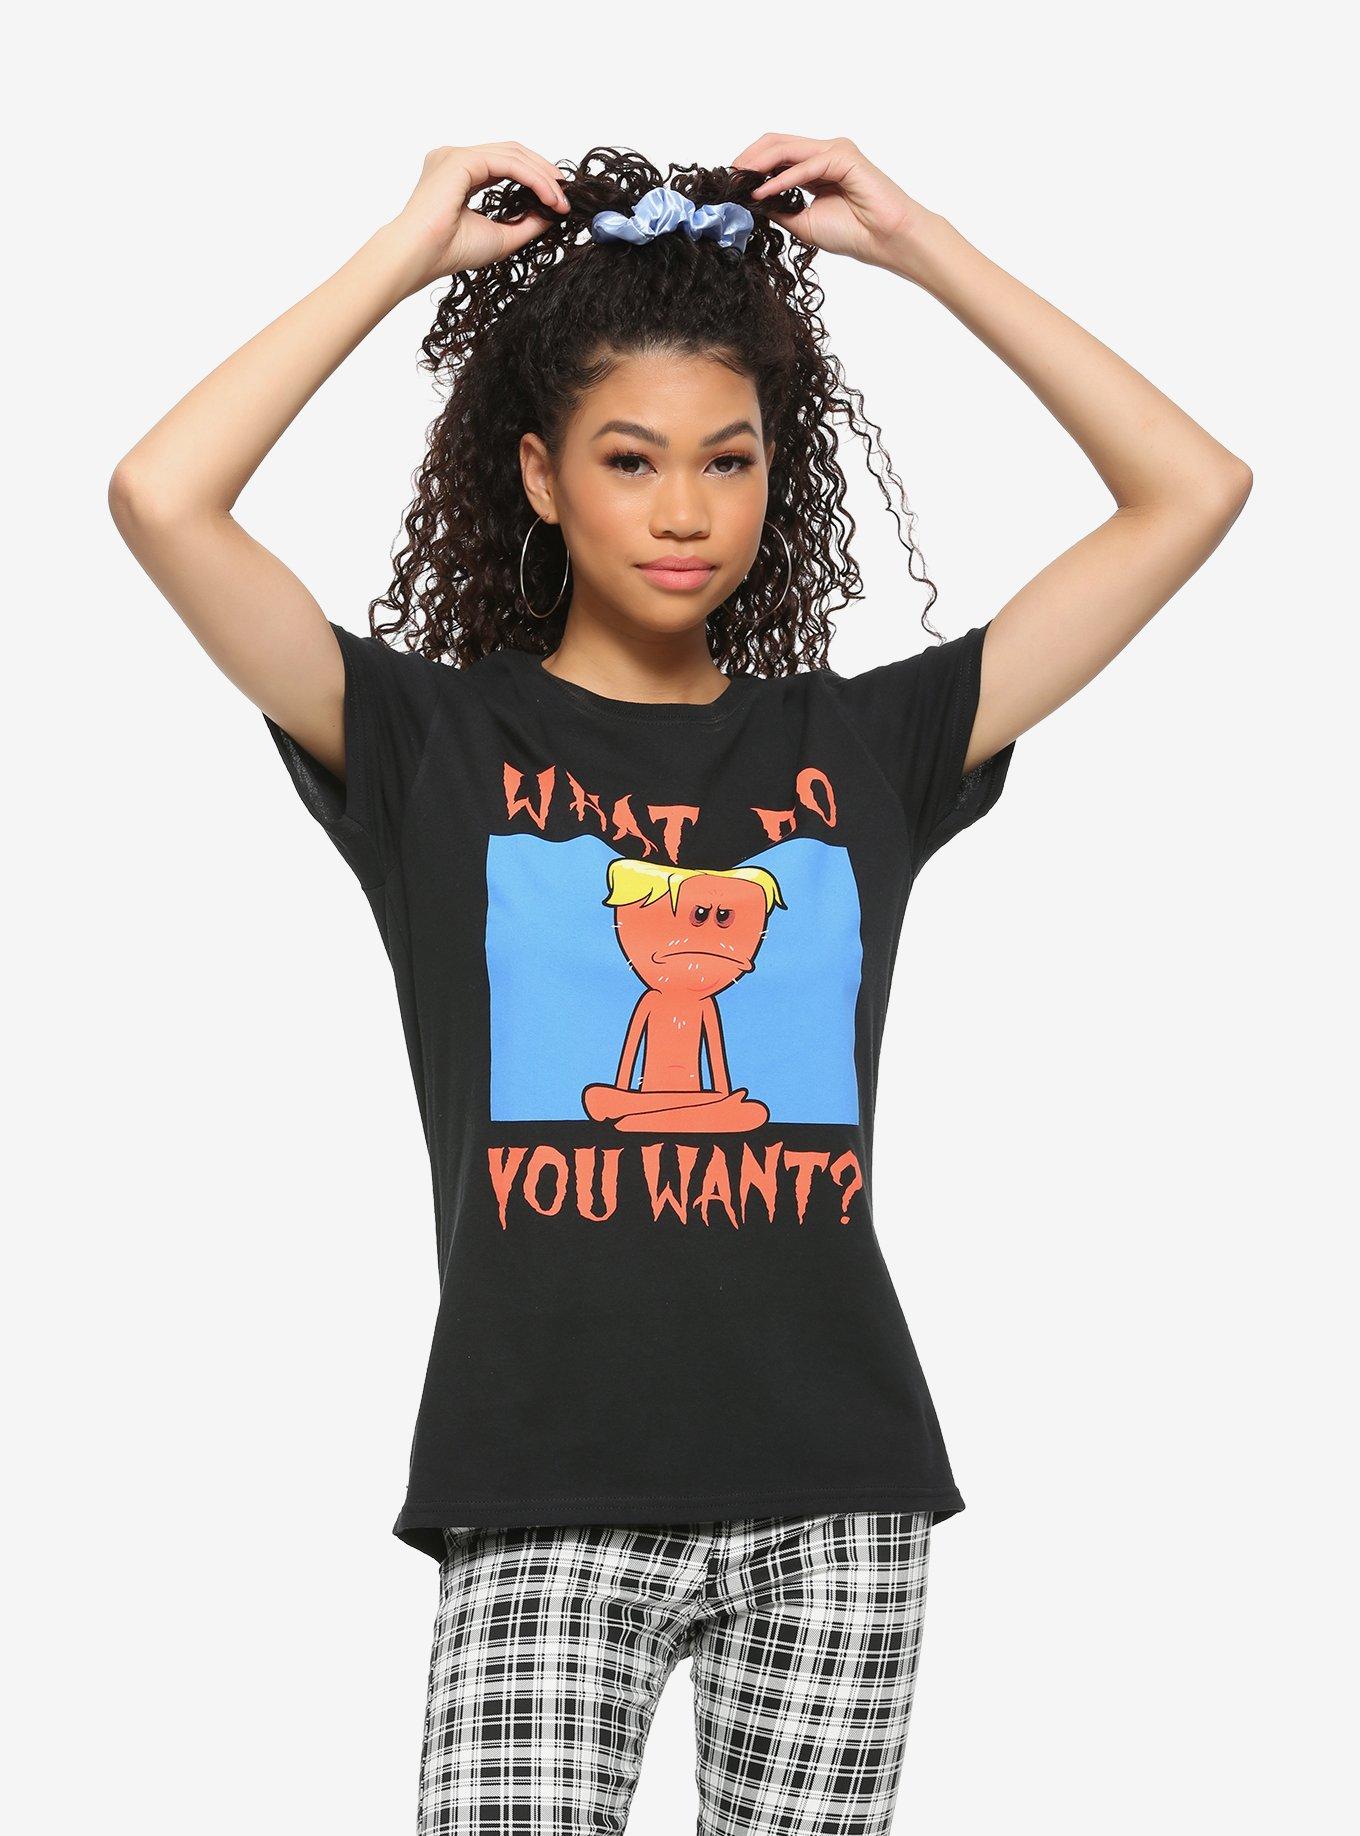 Rick And Morty Off-Brand Meeseeks Girls T-Shirt, MULTI, hi-res